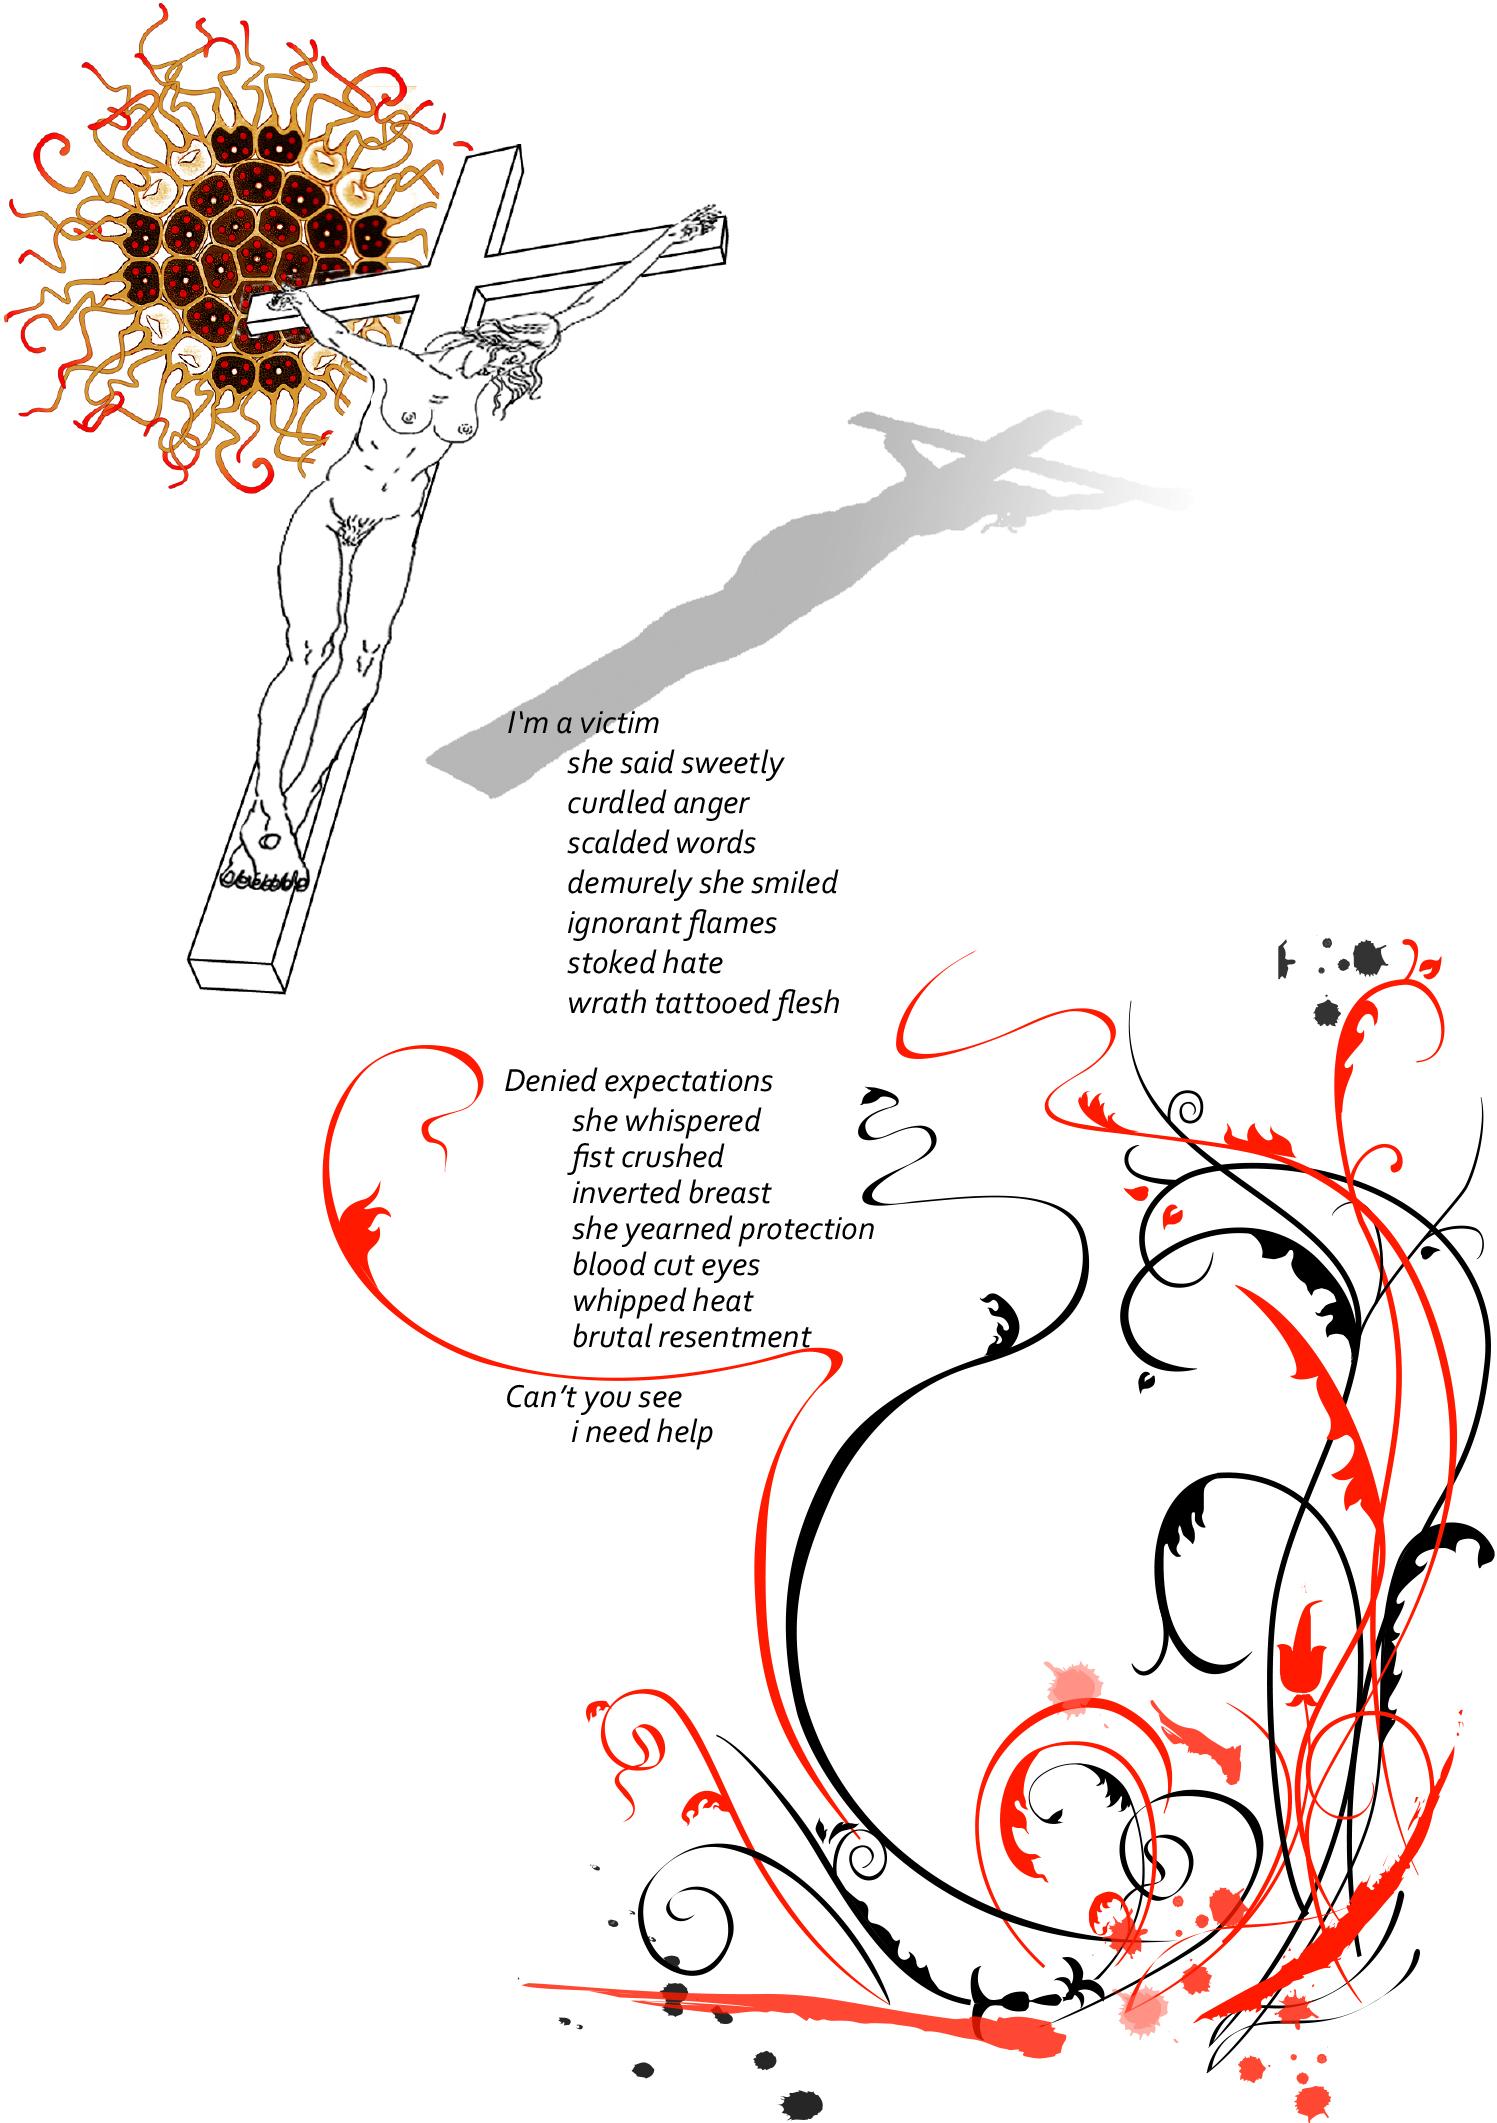 Lannie Hart Figurative Print - "Victim",  poem on paper with swirling red and black vines